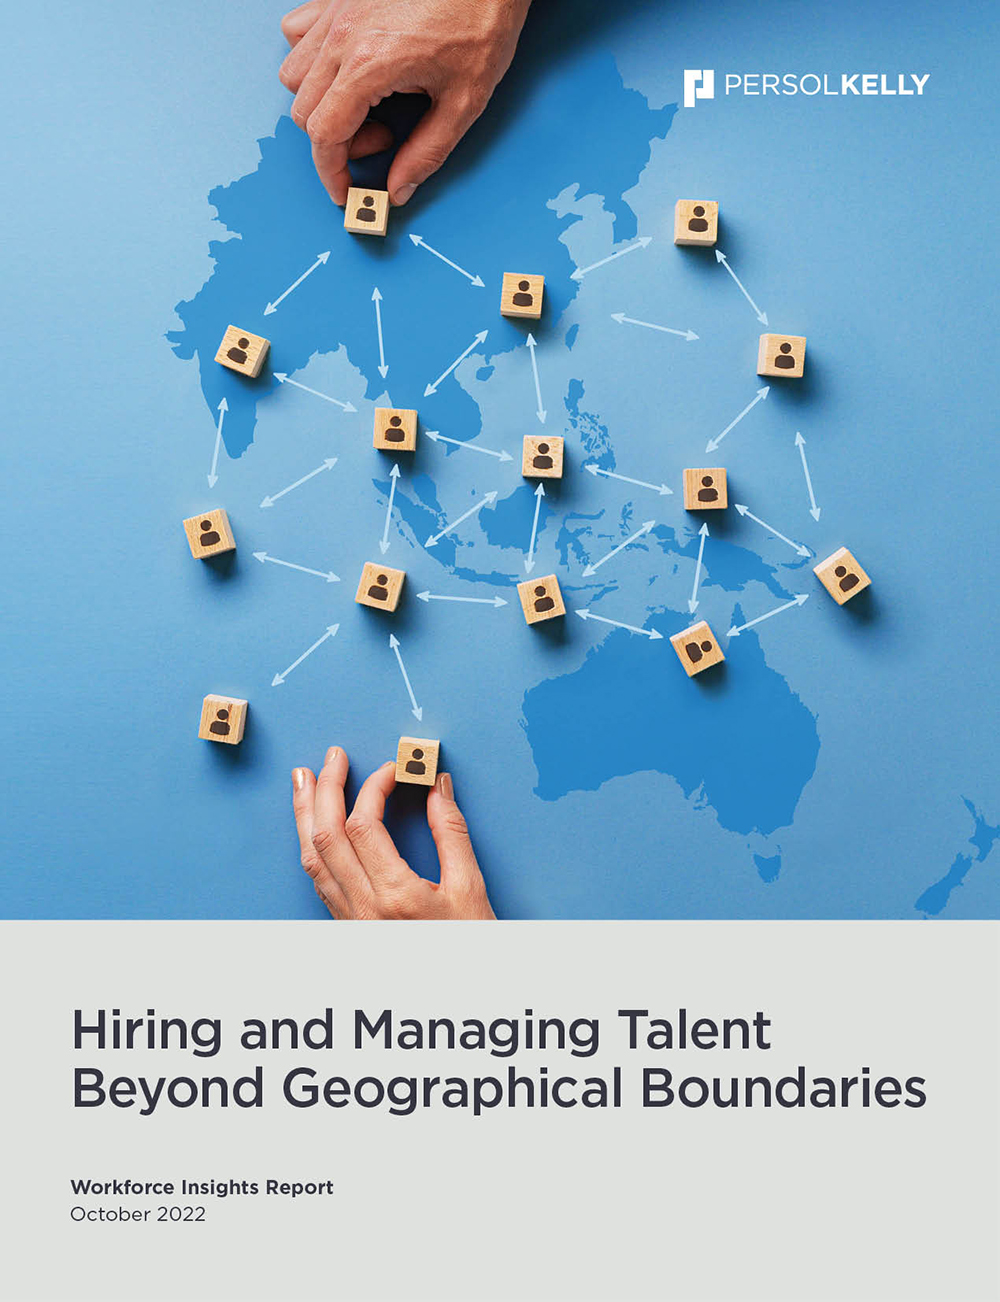 Hiring and Managing Talent Beyond Geographical Boundaries